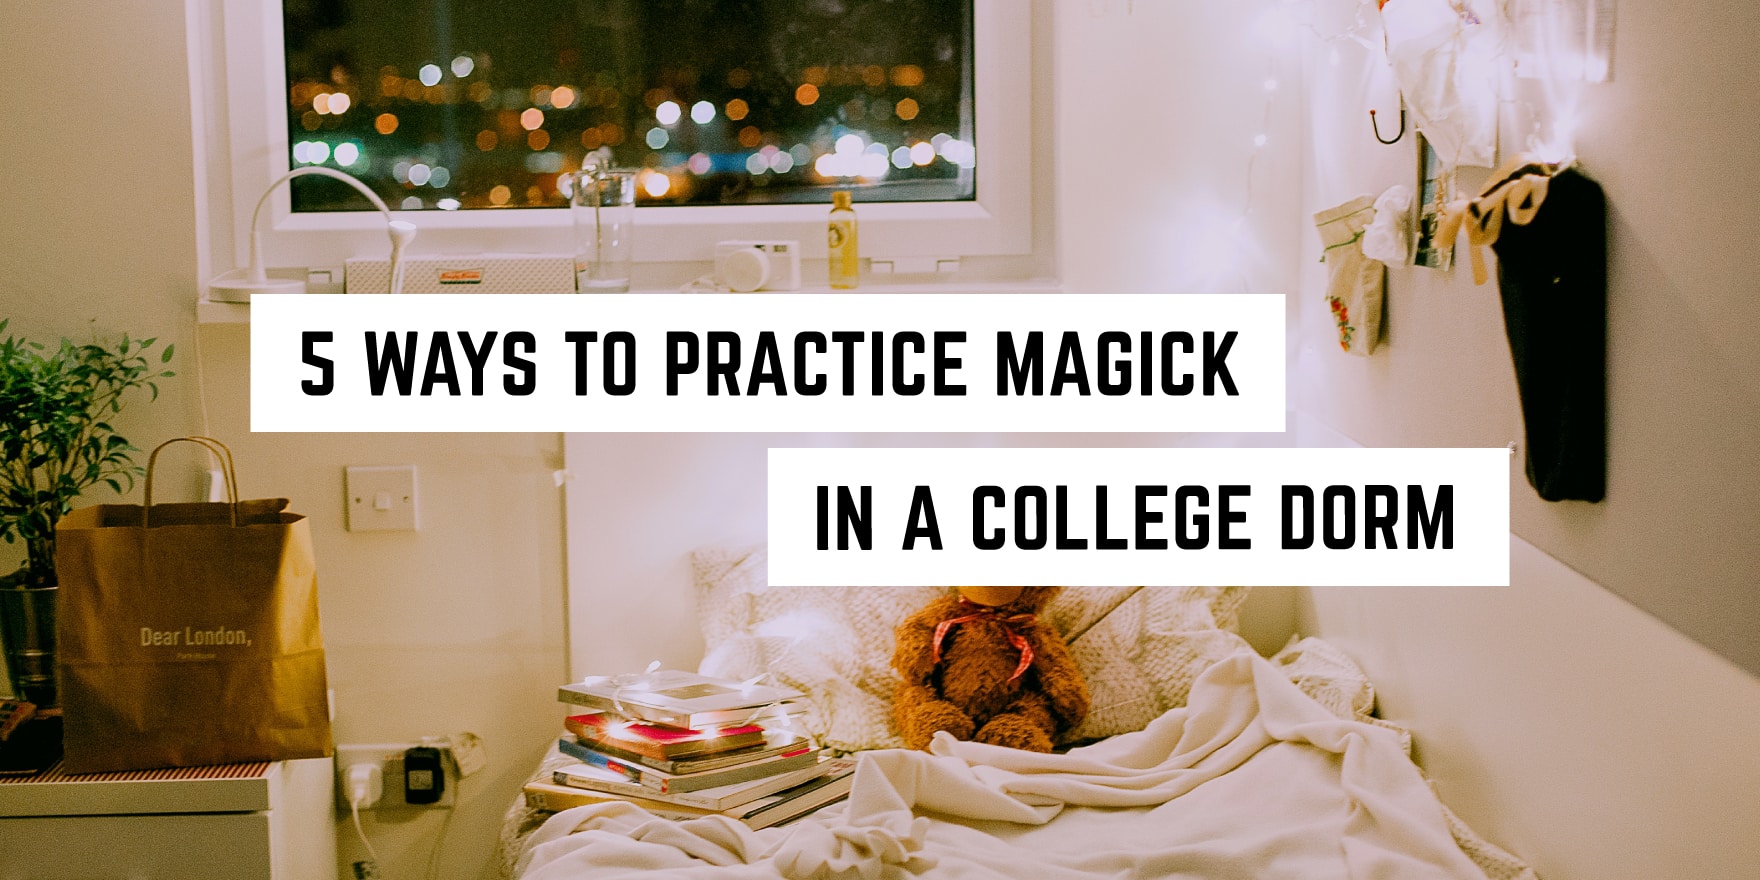 5 Ways to Practice Magick in a College Dorm